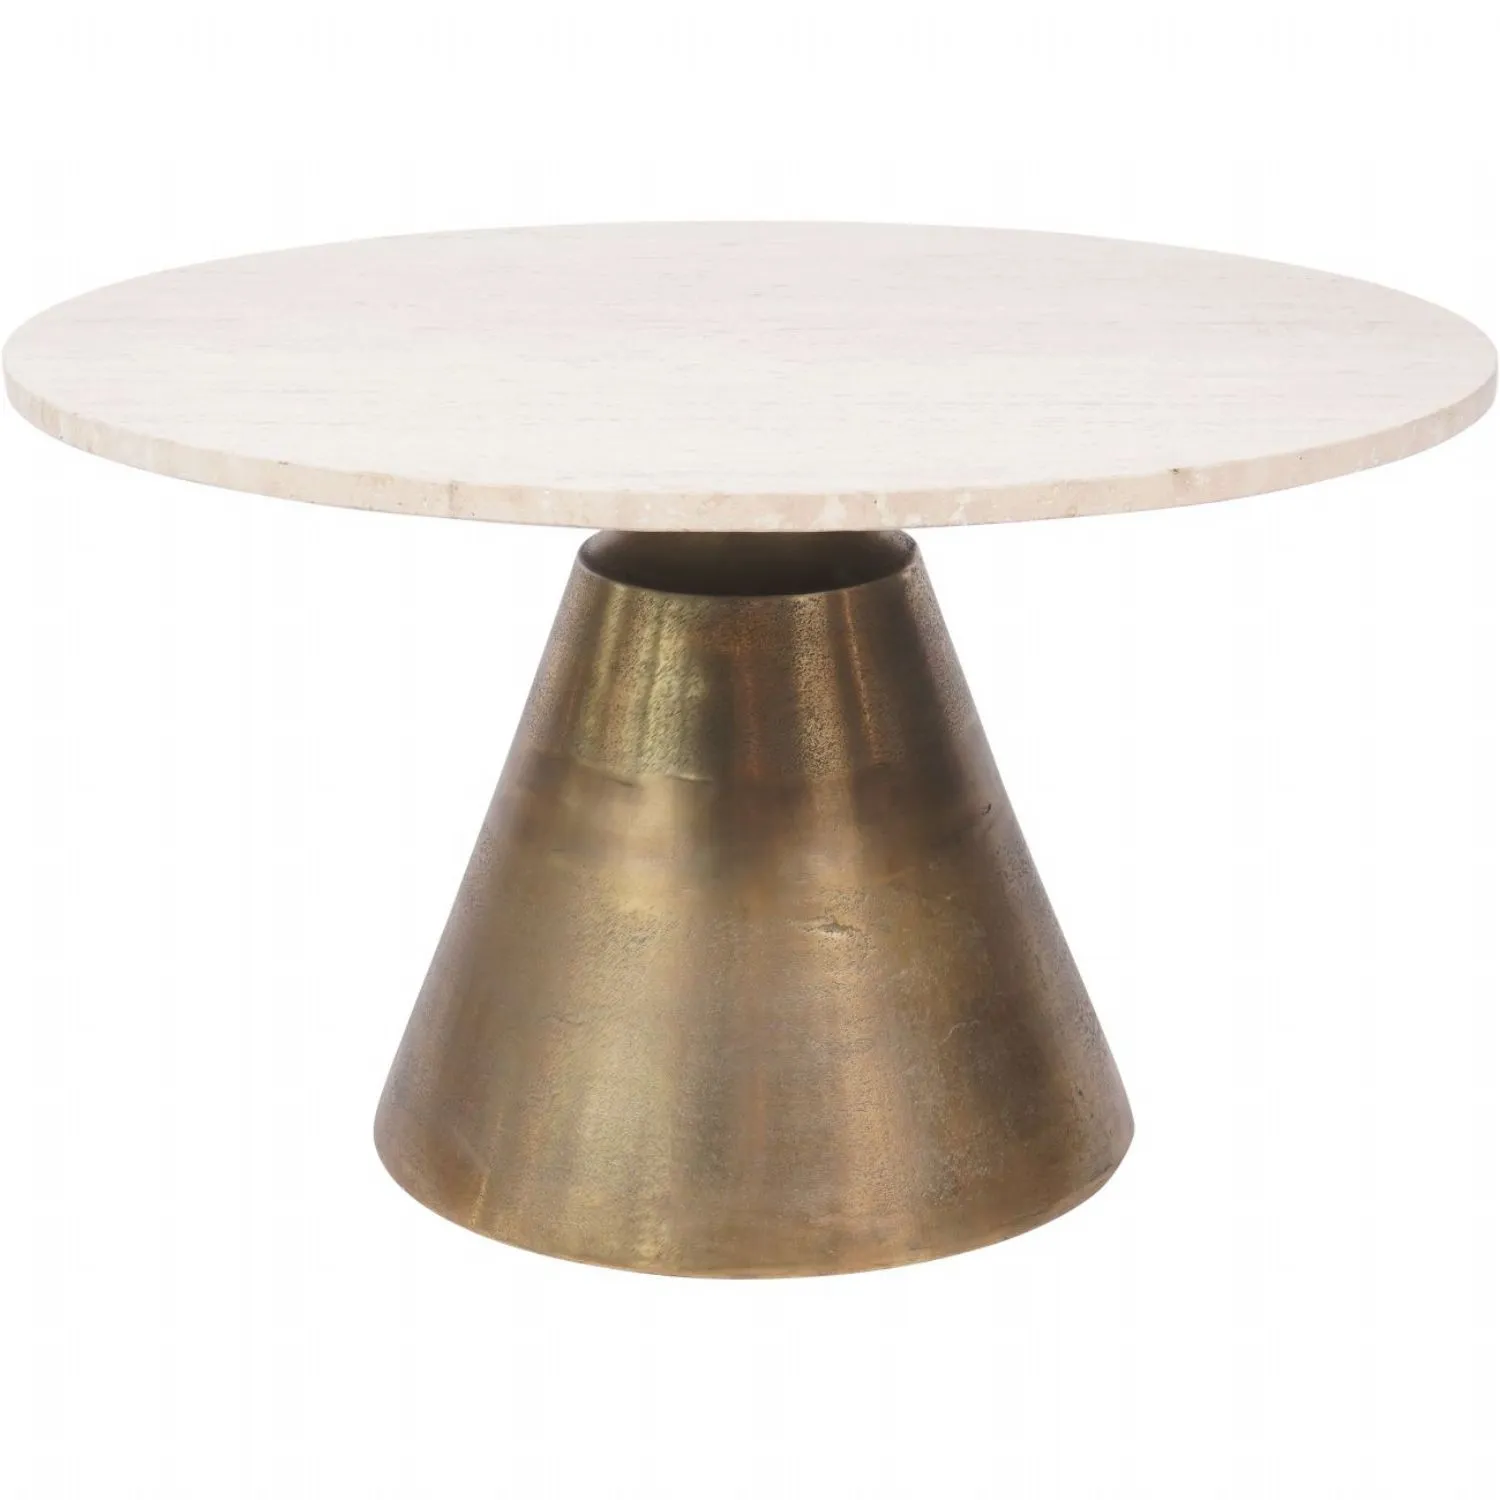 Clifton II Antique Brass and Light Travertine Coffee Table Large 75cm